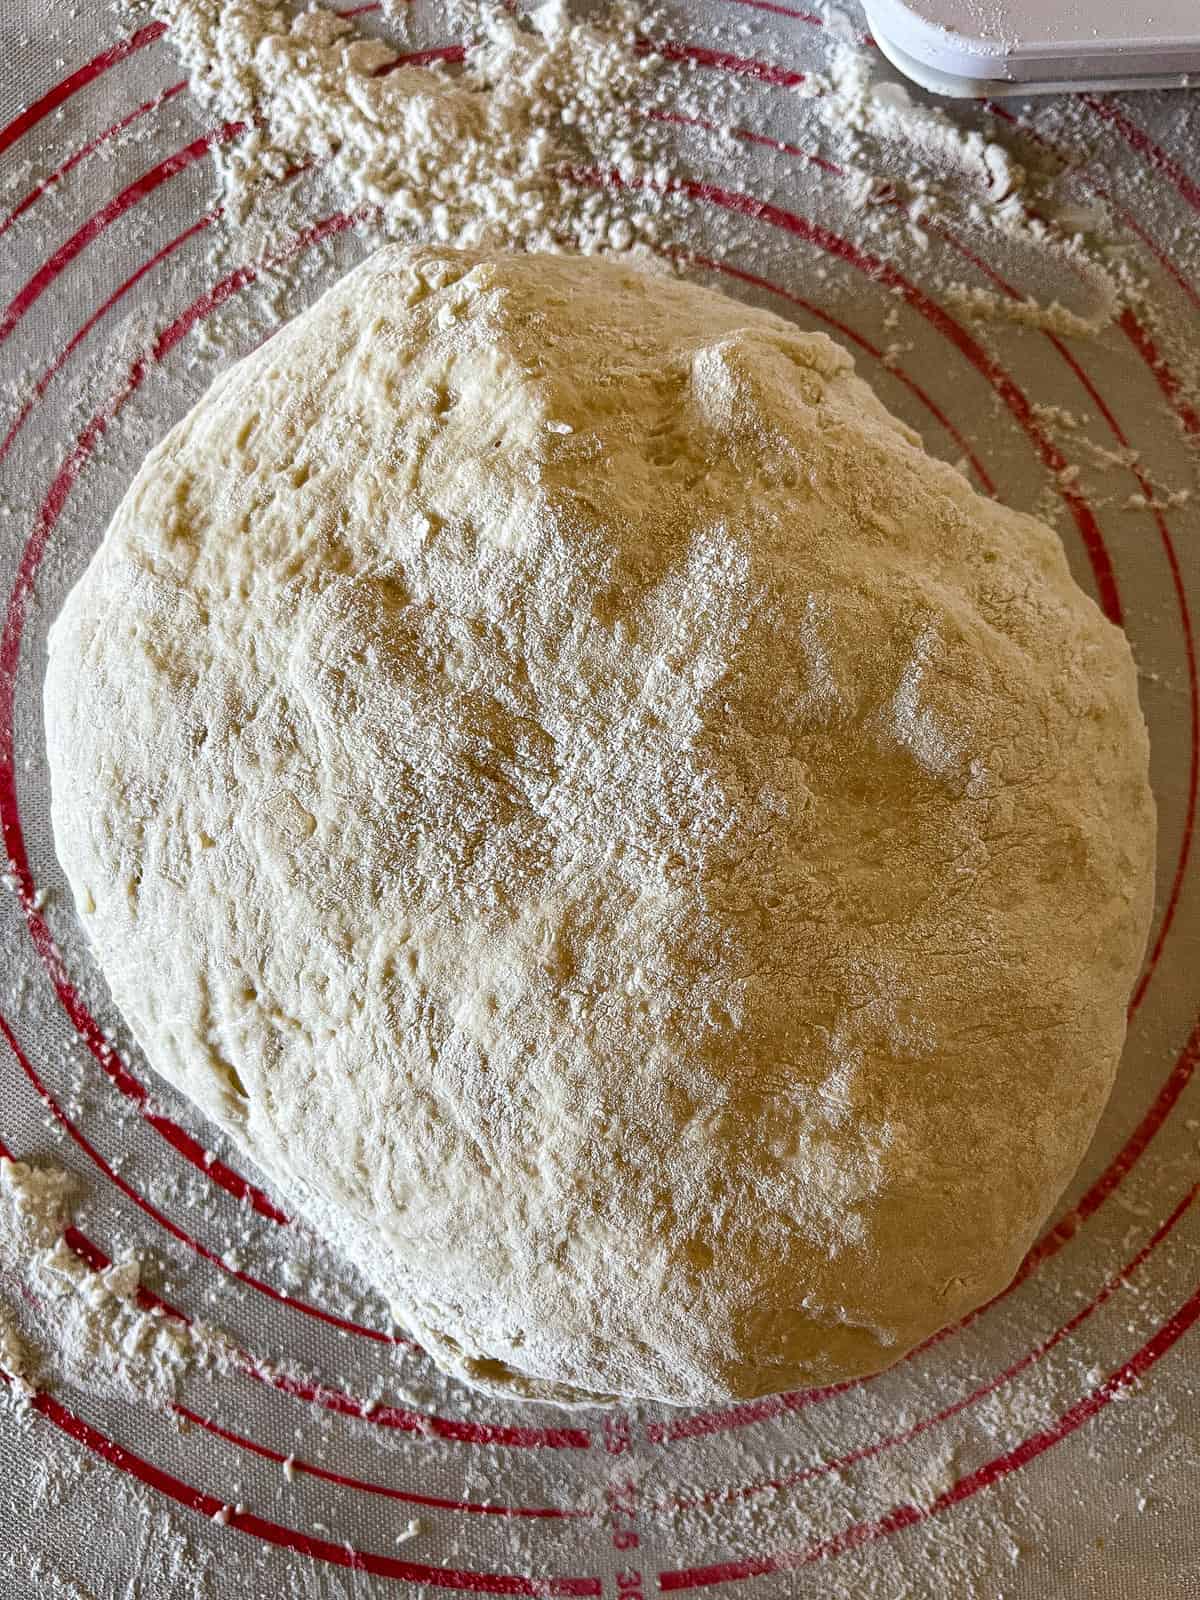 process of rolling the dough